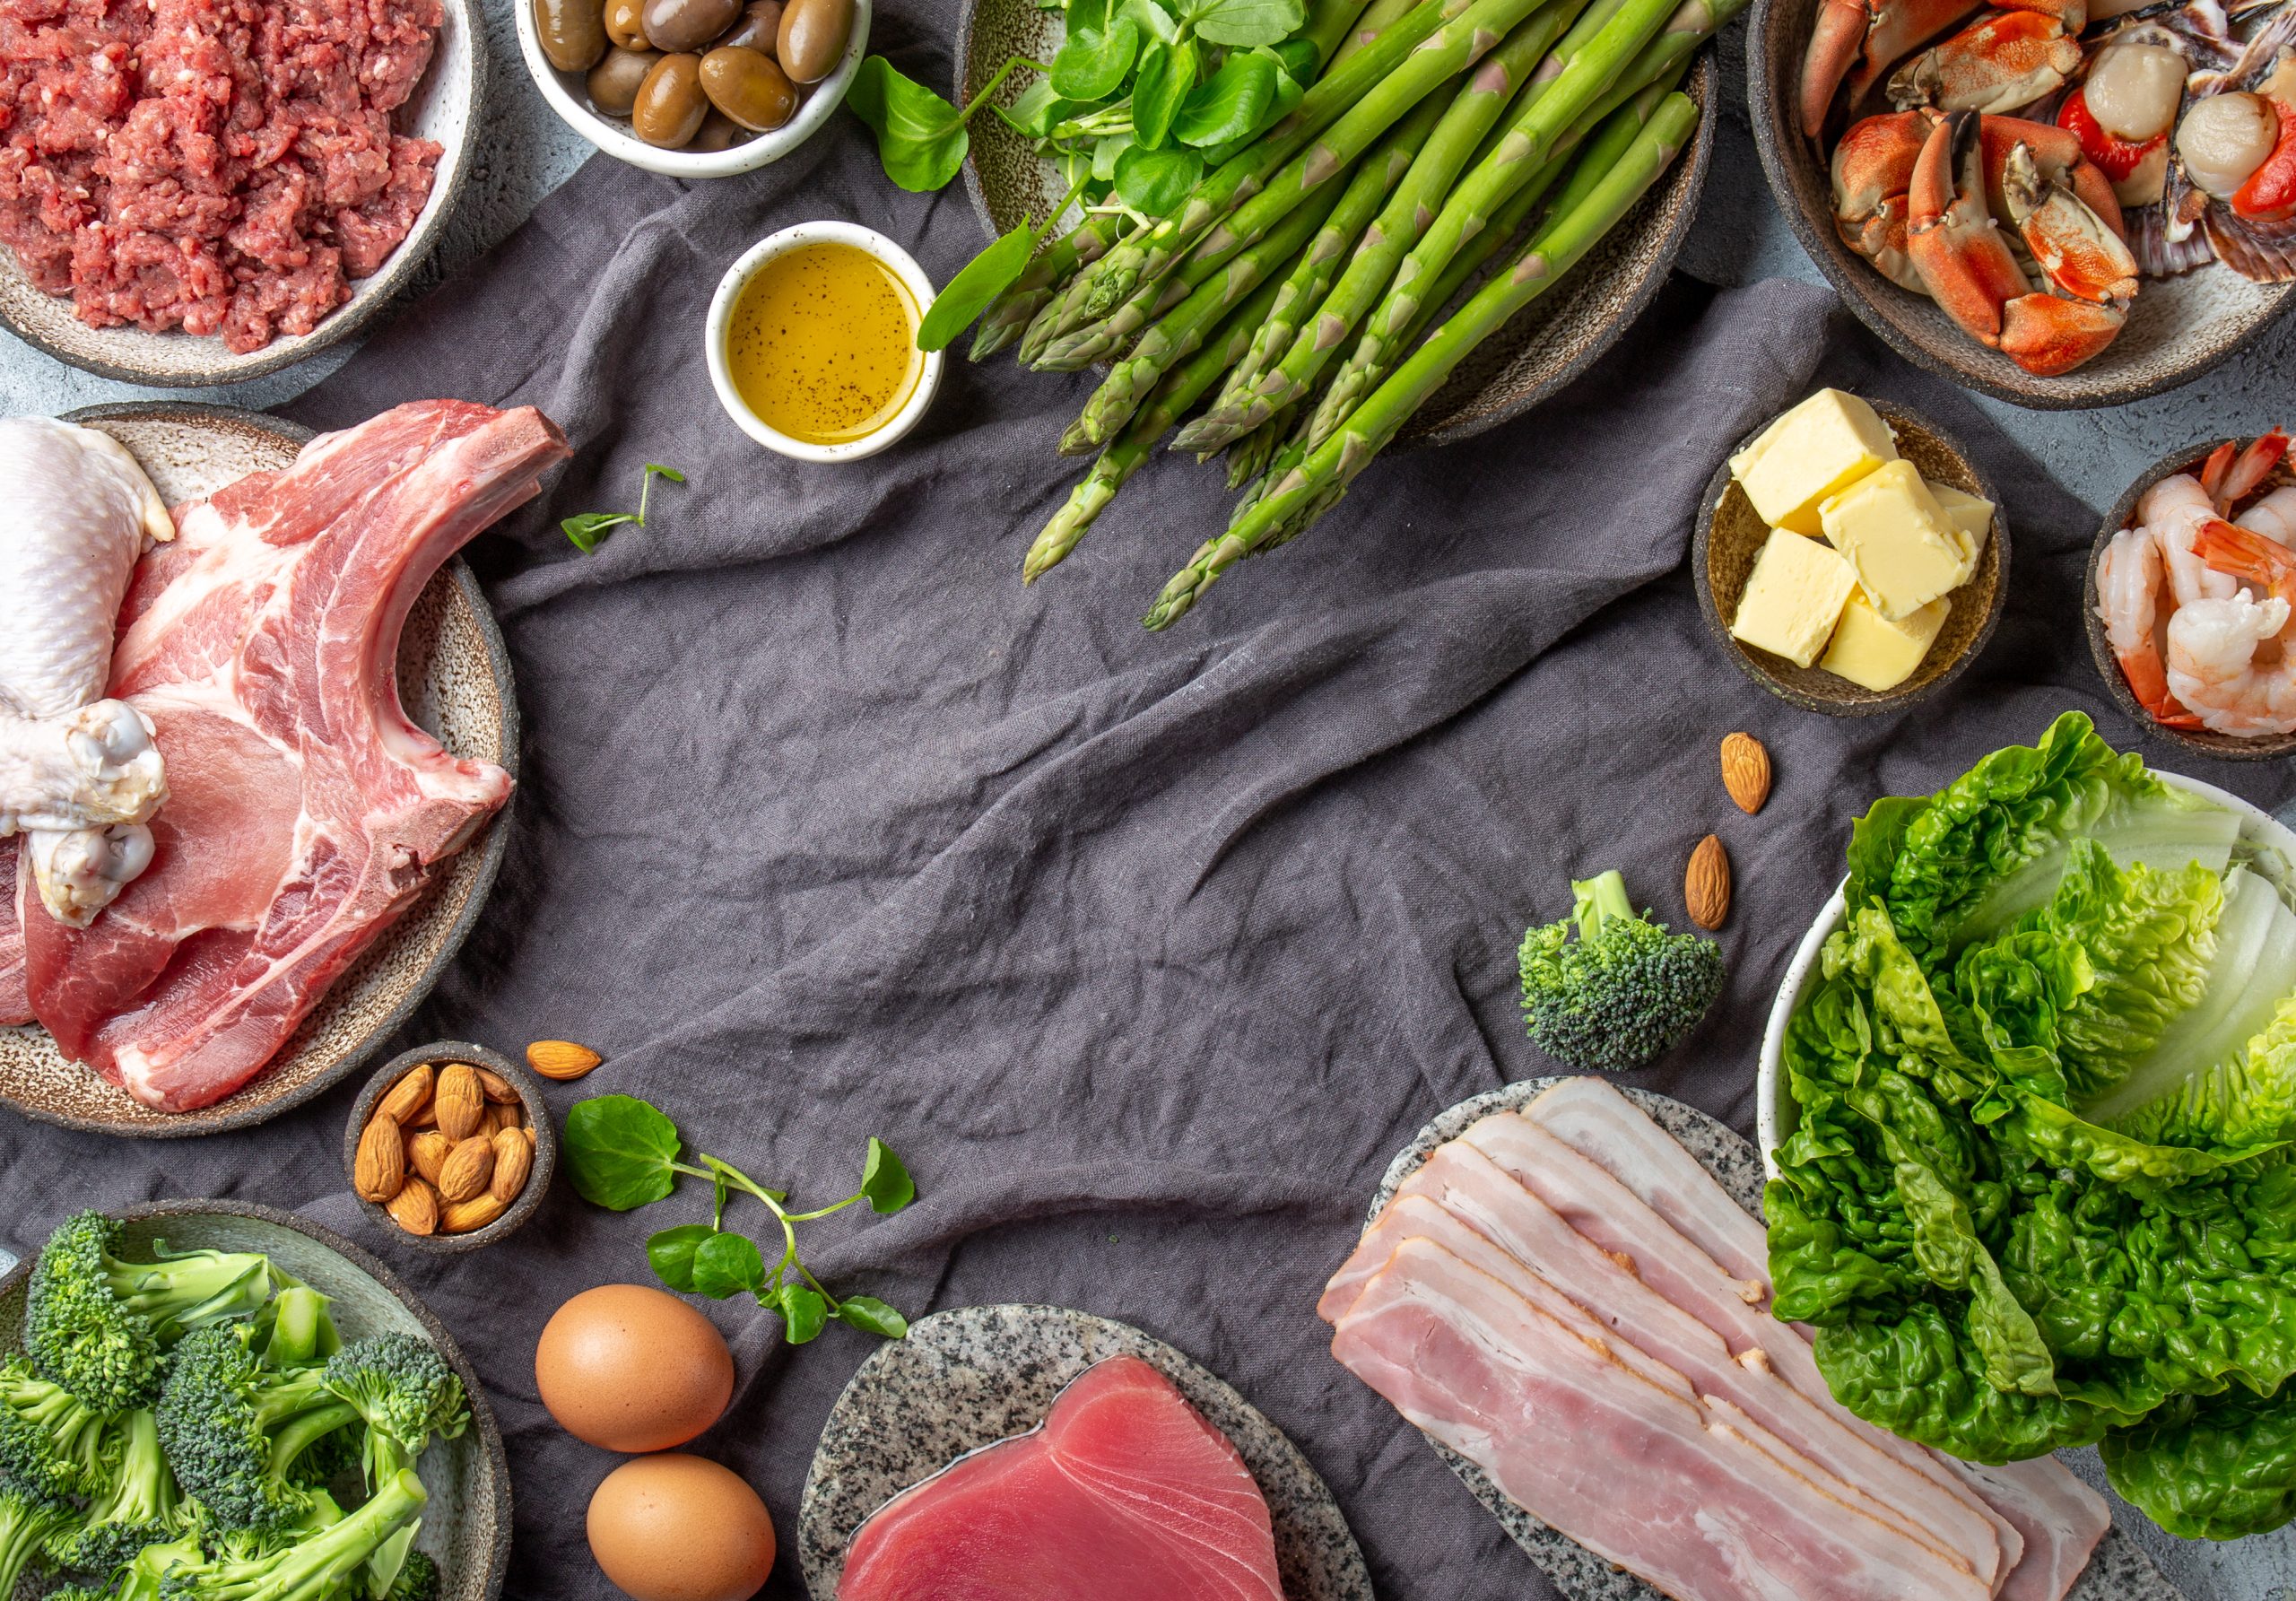 The image presents a variety of foods representing both plant-based and animal-based nutrients, ideal for a comparison of different diet types such as the carnivore diet vs keto diet. Visible in the arrangement are meats like beef, chicken, and pork, seafood such as shrimp and crab, alongside dairy products like butter. Complementing these are plant-based items including asparagus, almonds, broccoli, and leafy greens, providing a rich contrast of dietary options. This setup effectively illustrates the diverse sources of protein, carbohydrates, and fats available in different diets.